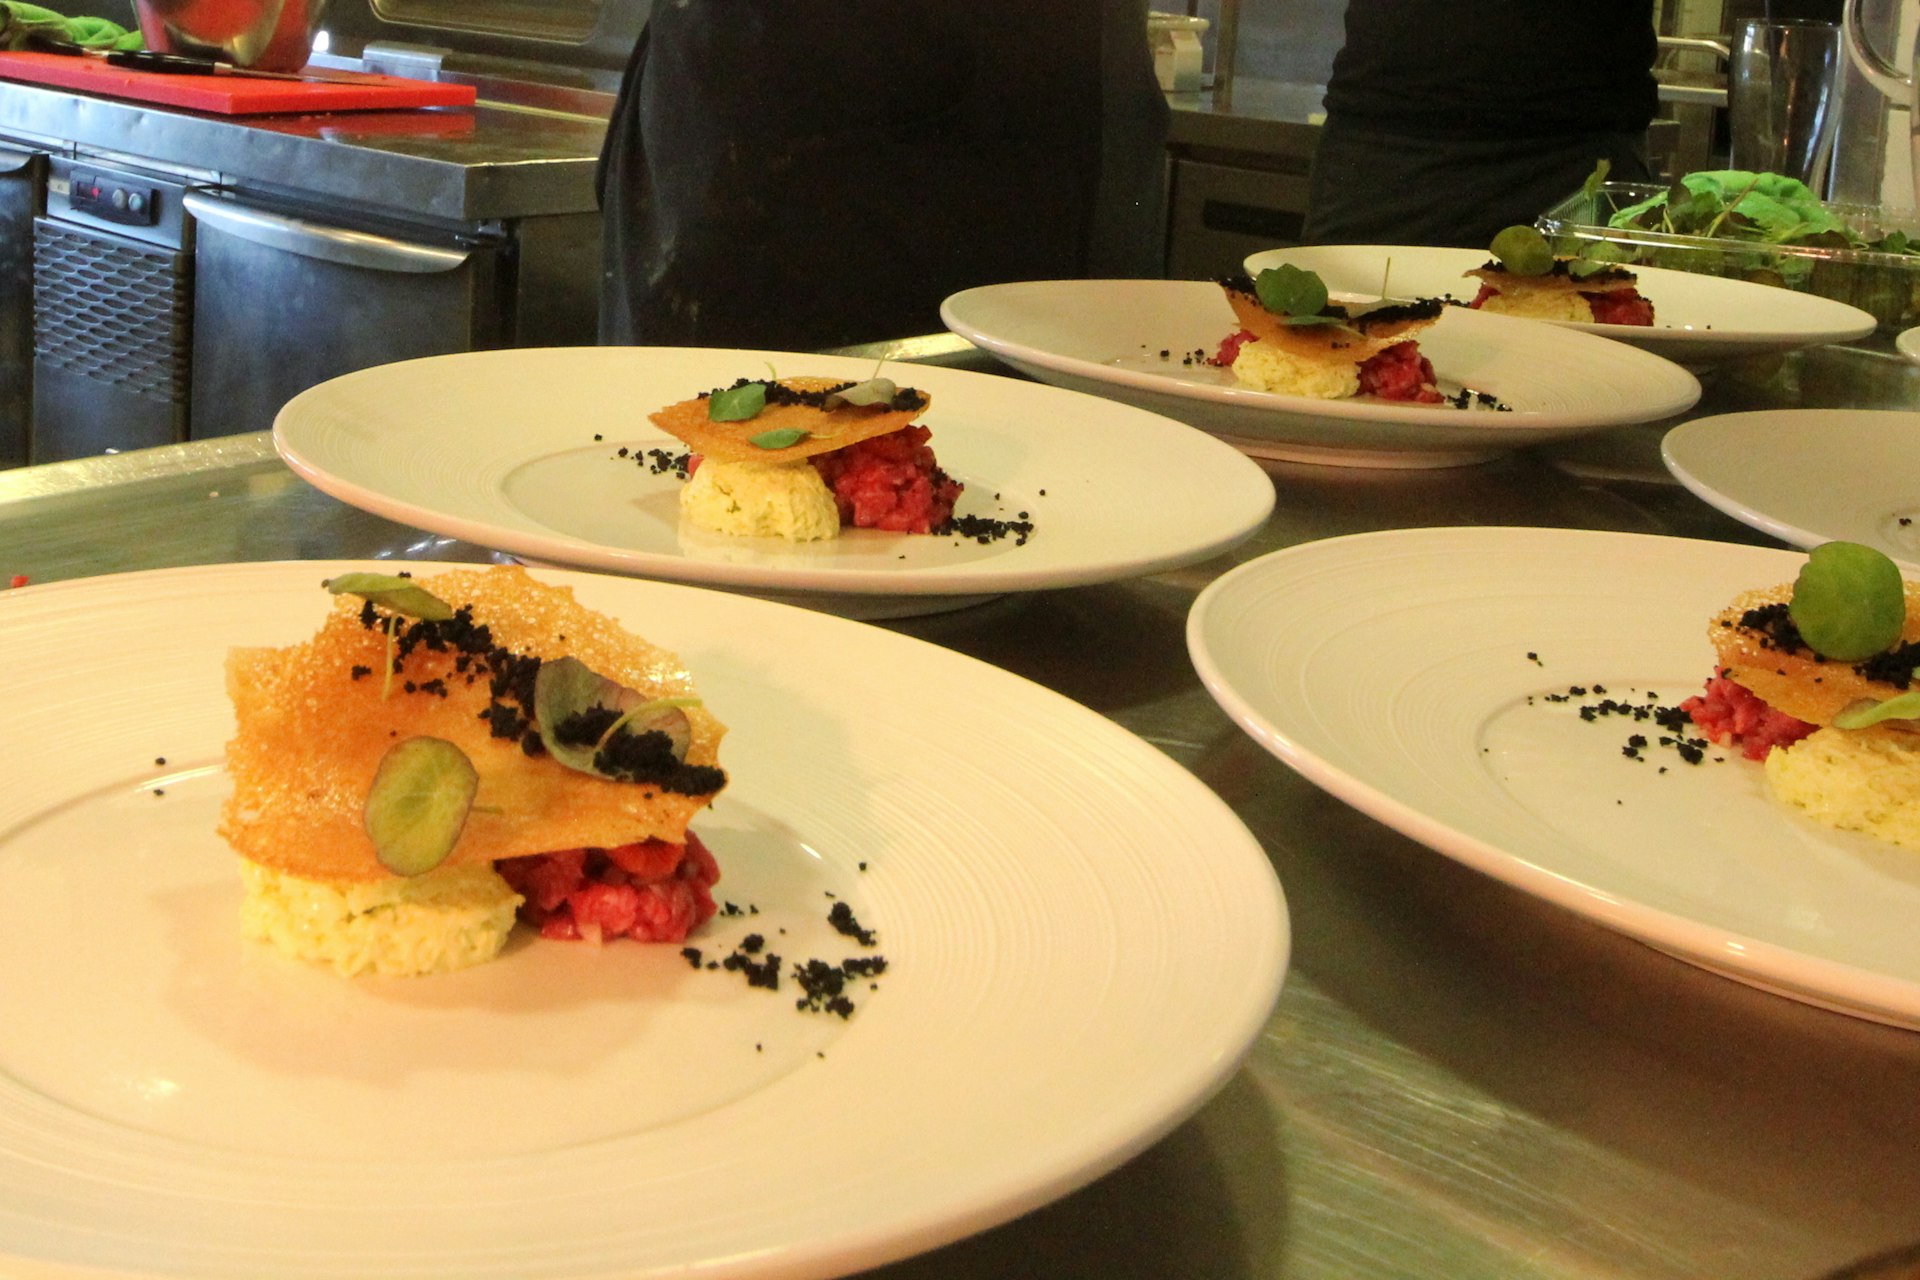 New Nordic cuisine plated up and ready to be served at Sarfalik, Nuuk